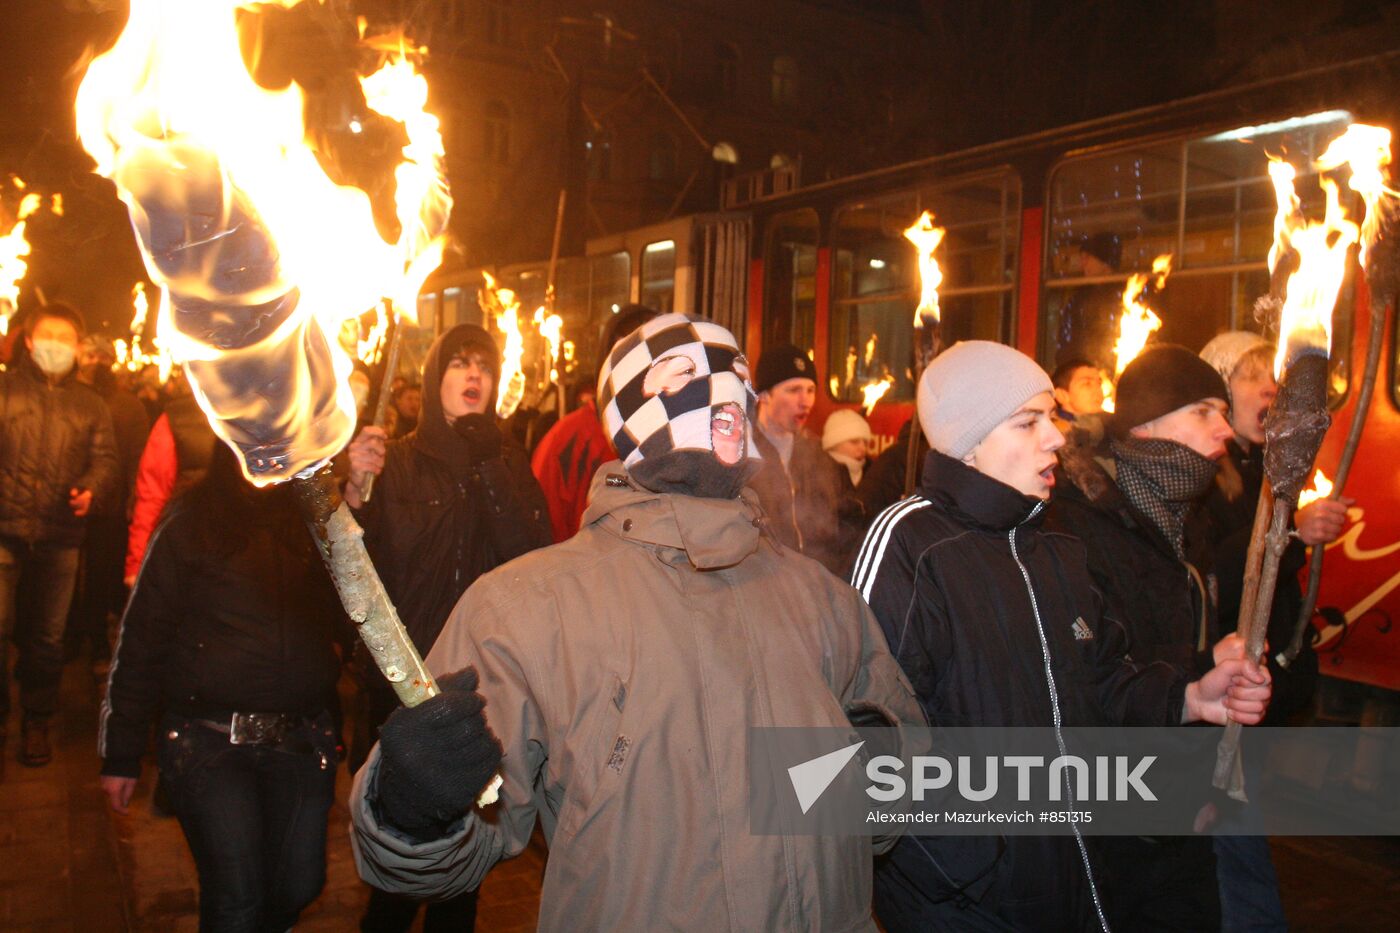 Torchlight march, a tribute to Kruty victims